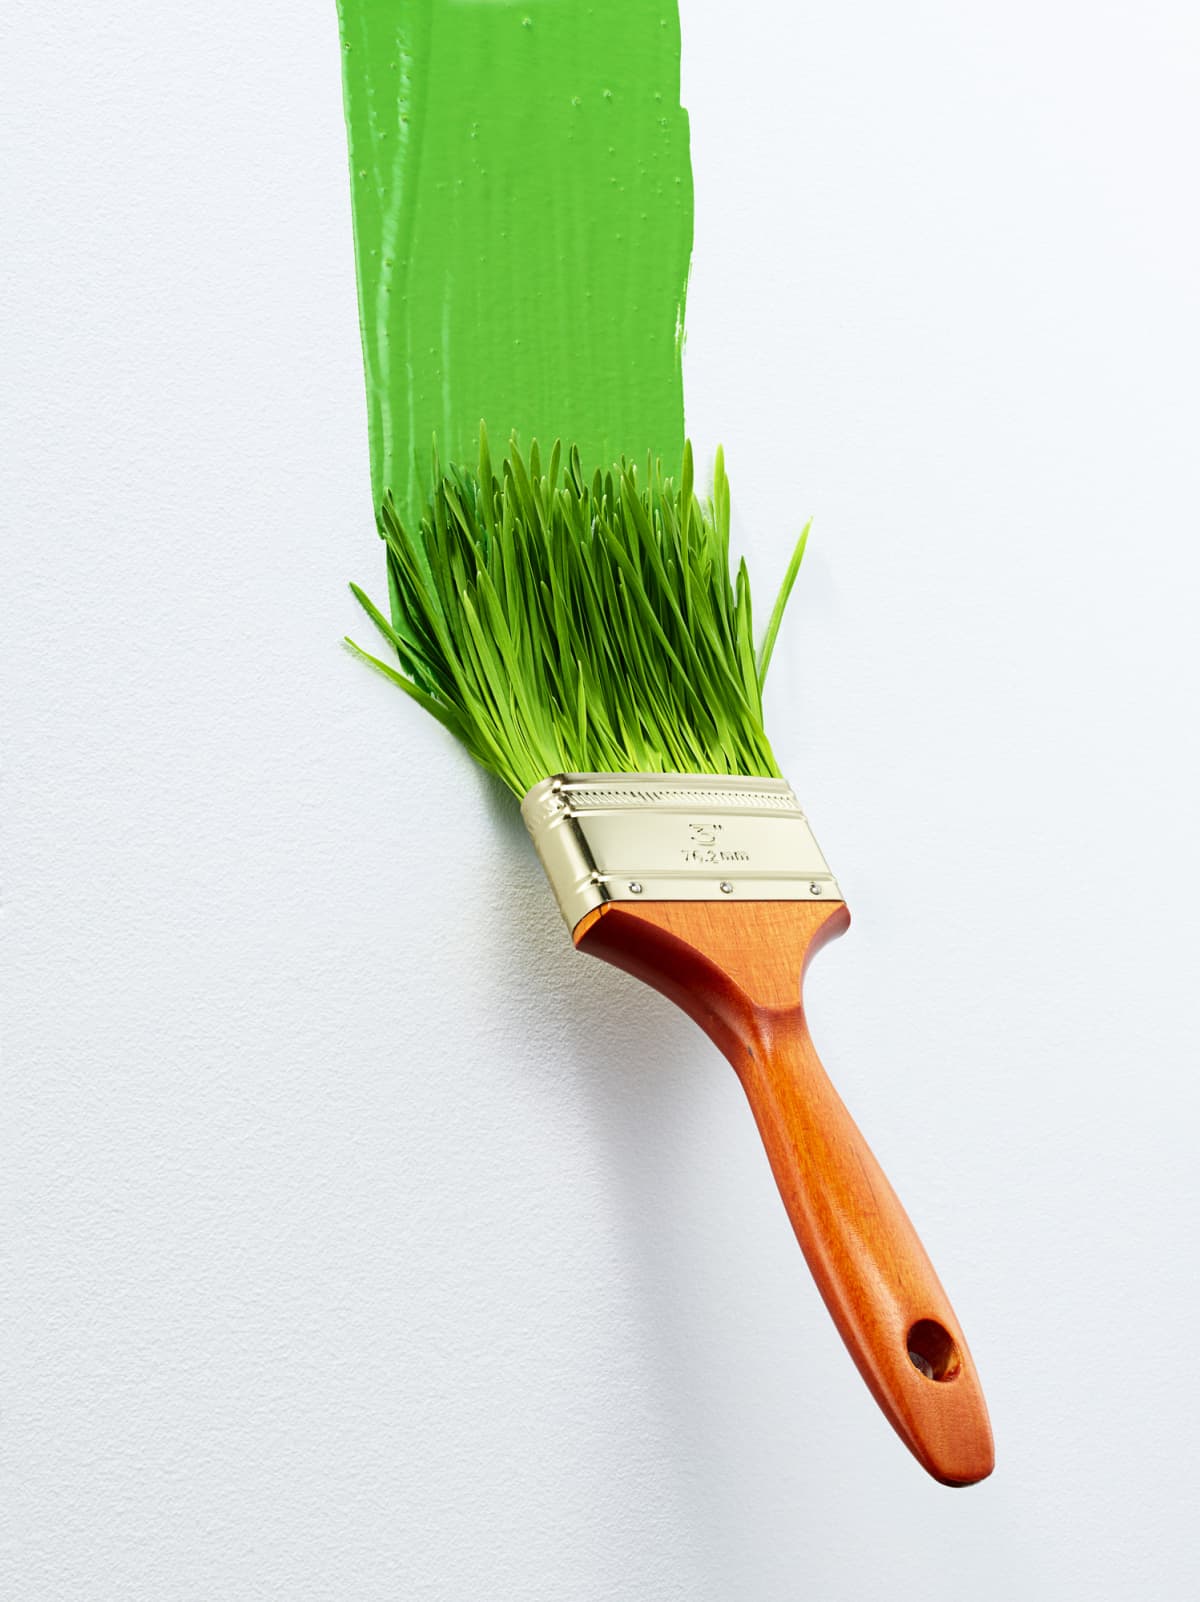 Painting a strip of green paint on a wall with a paintbrush